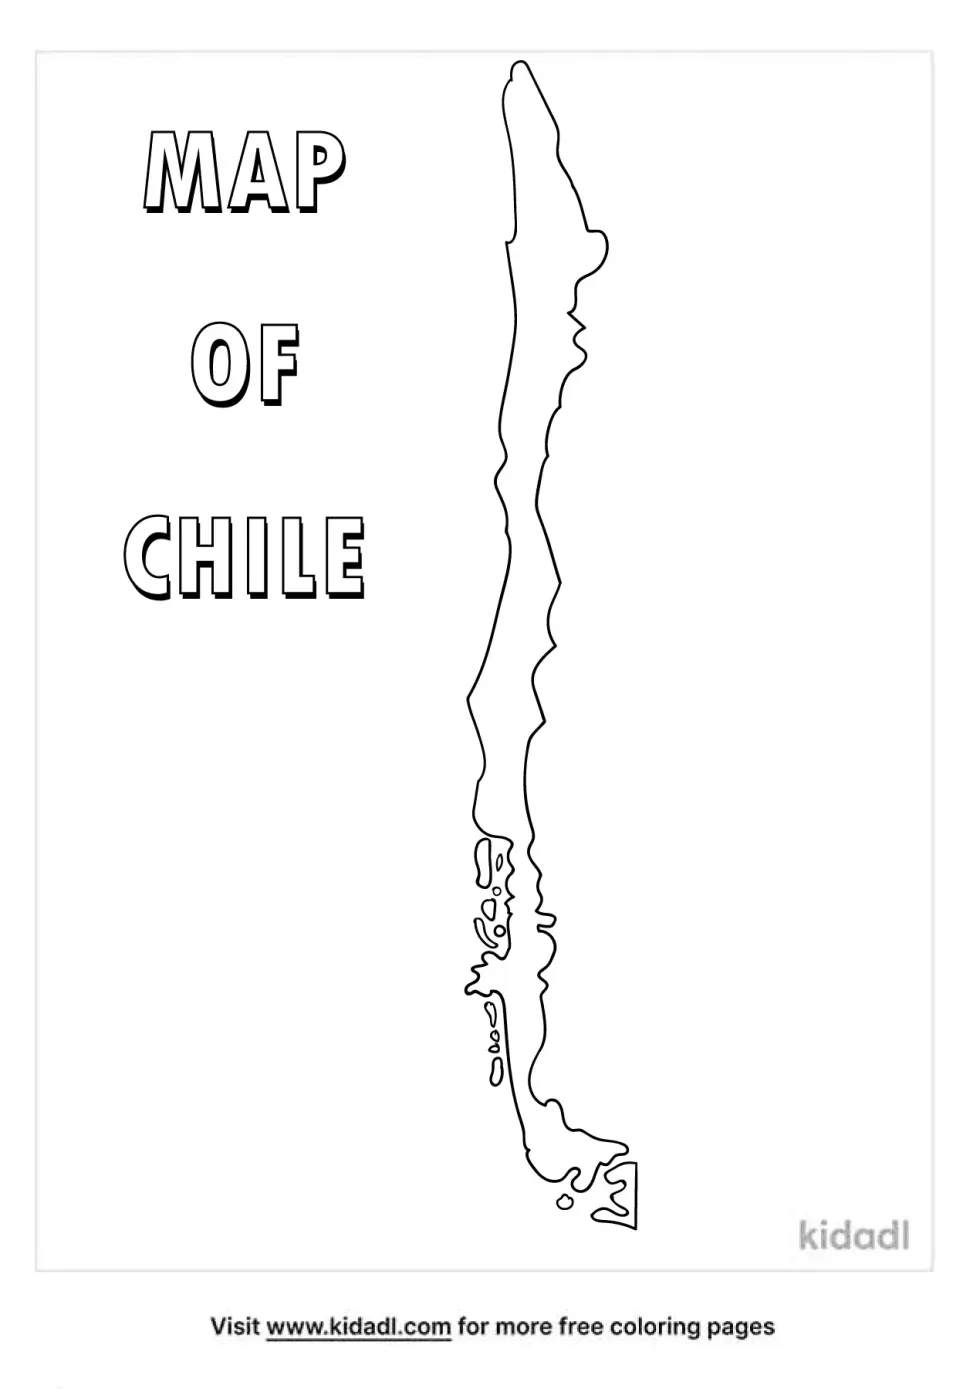 Map Of Chile Coloring Page